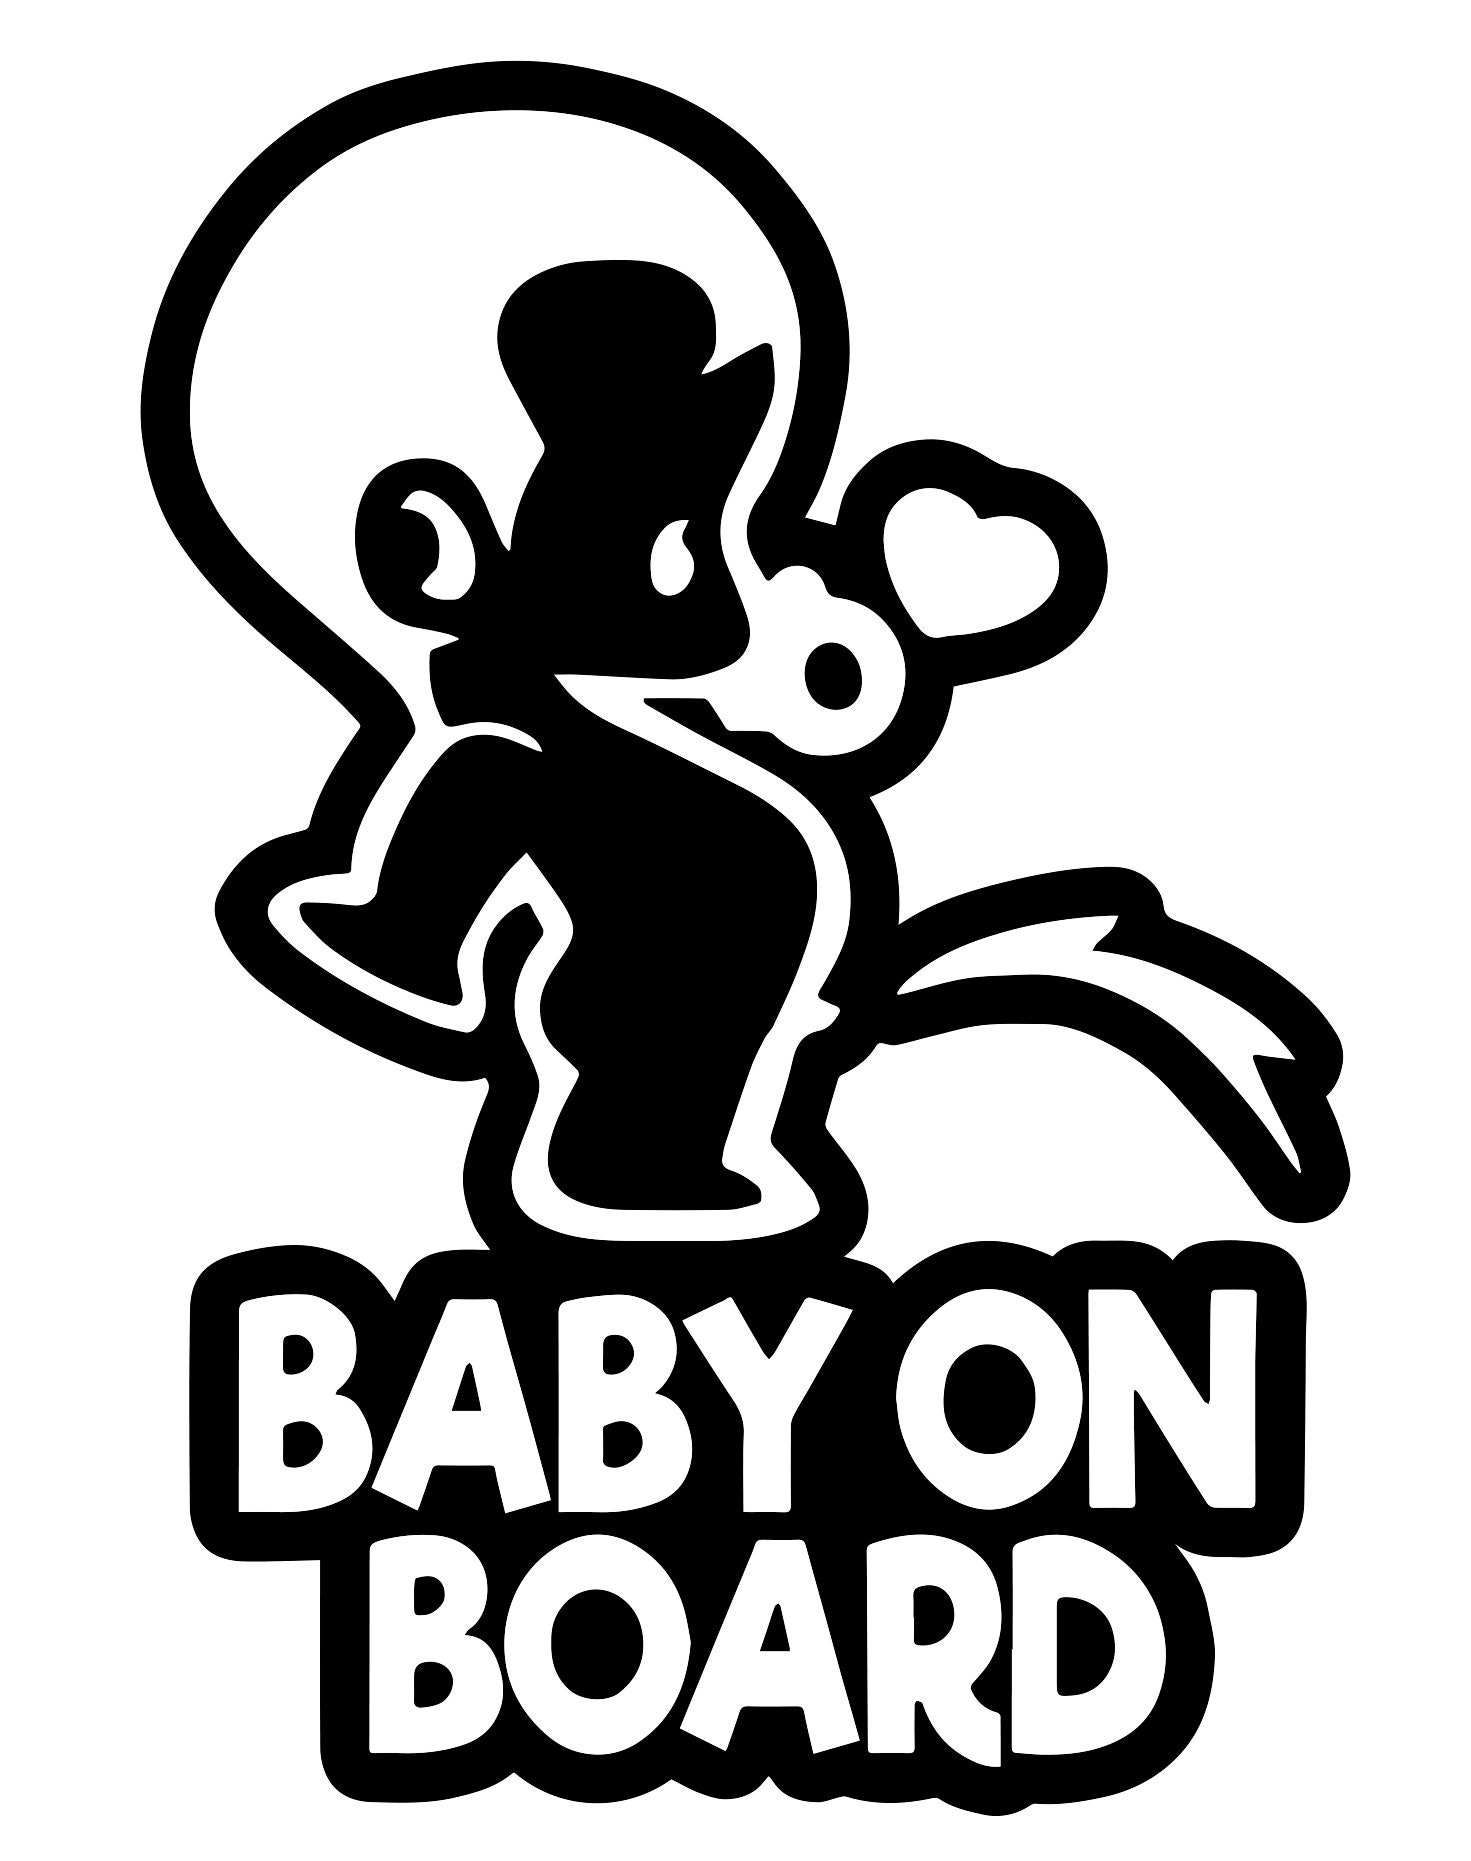 Baby on Board - Etsy